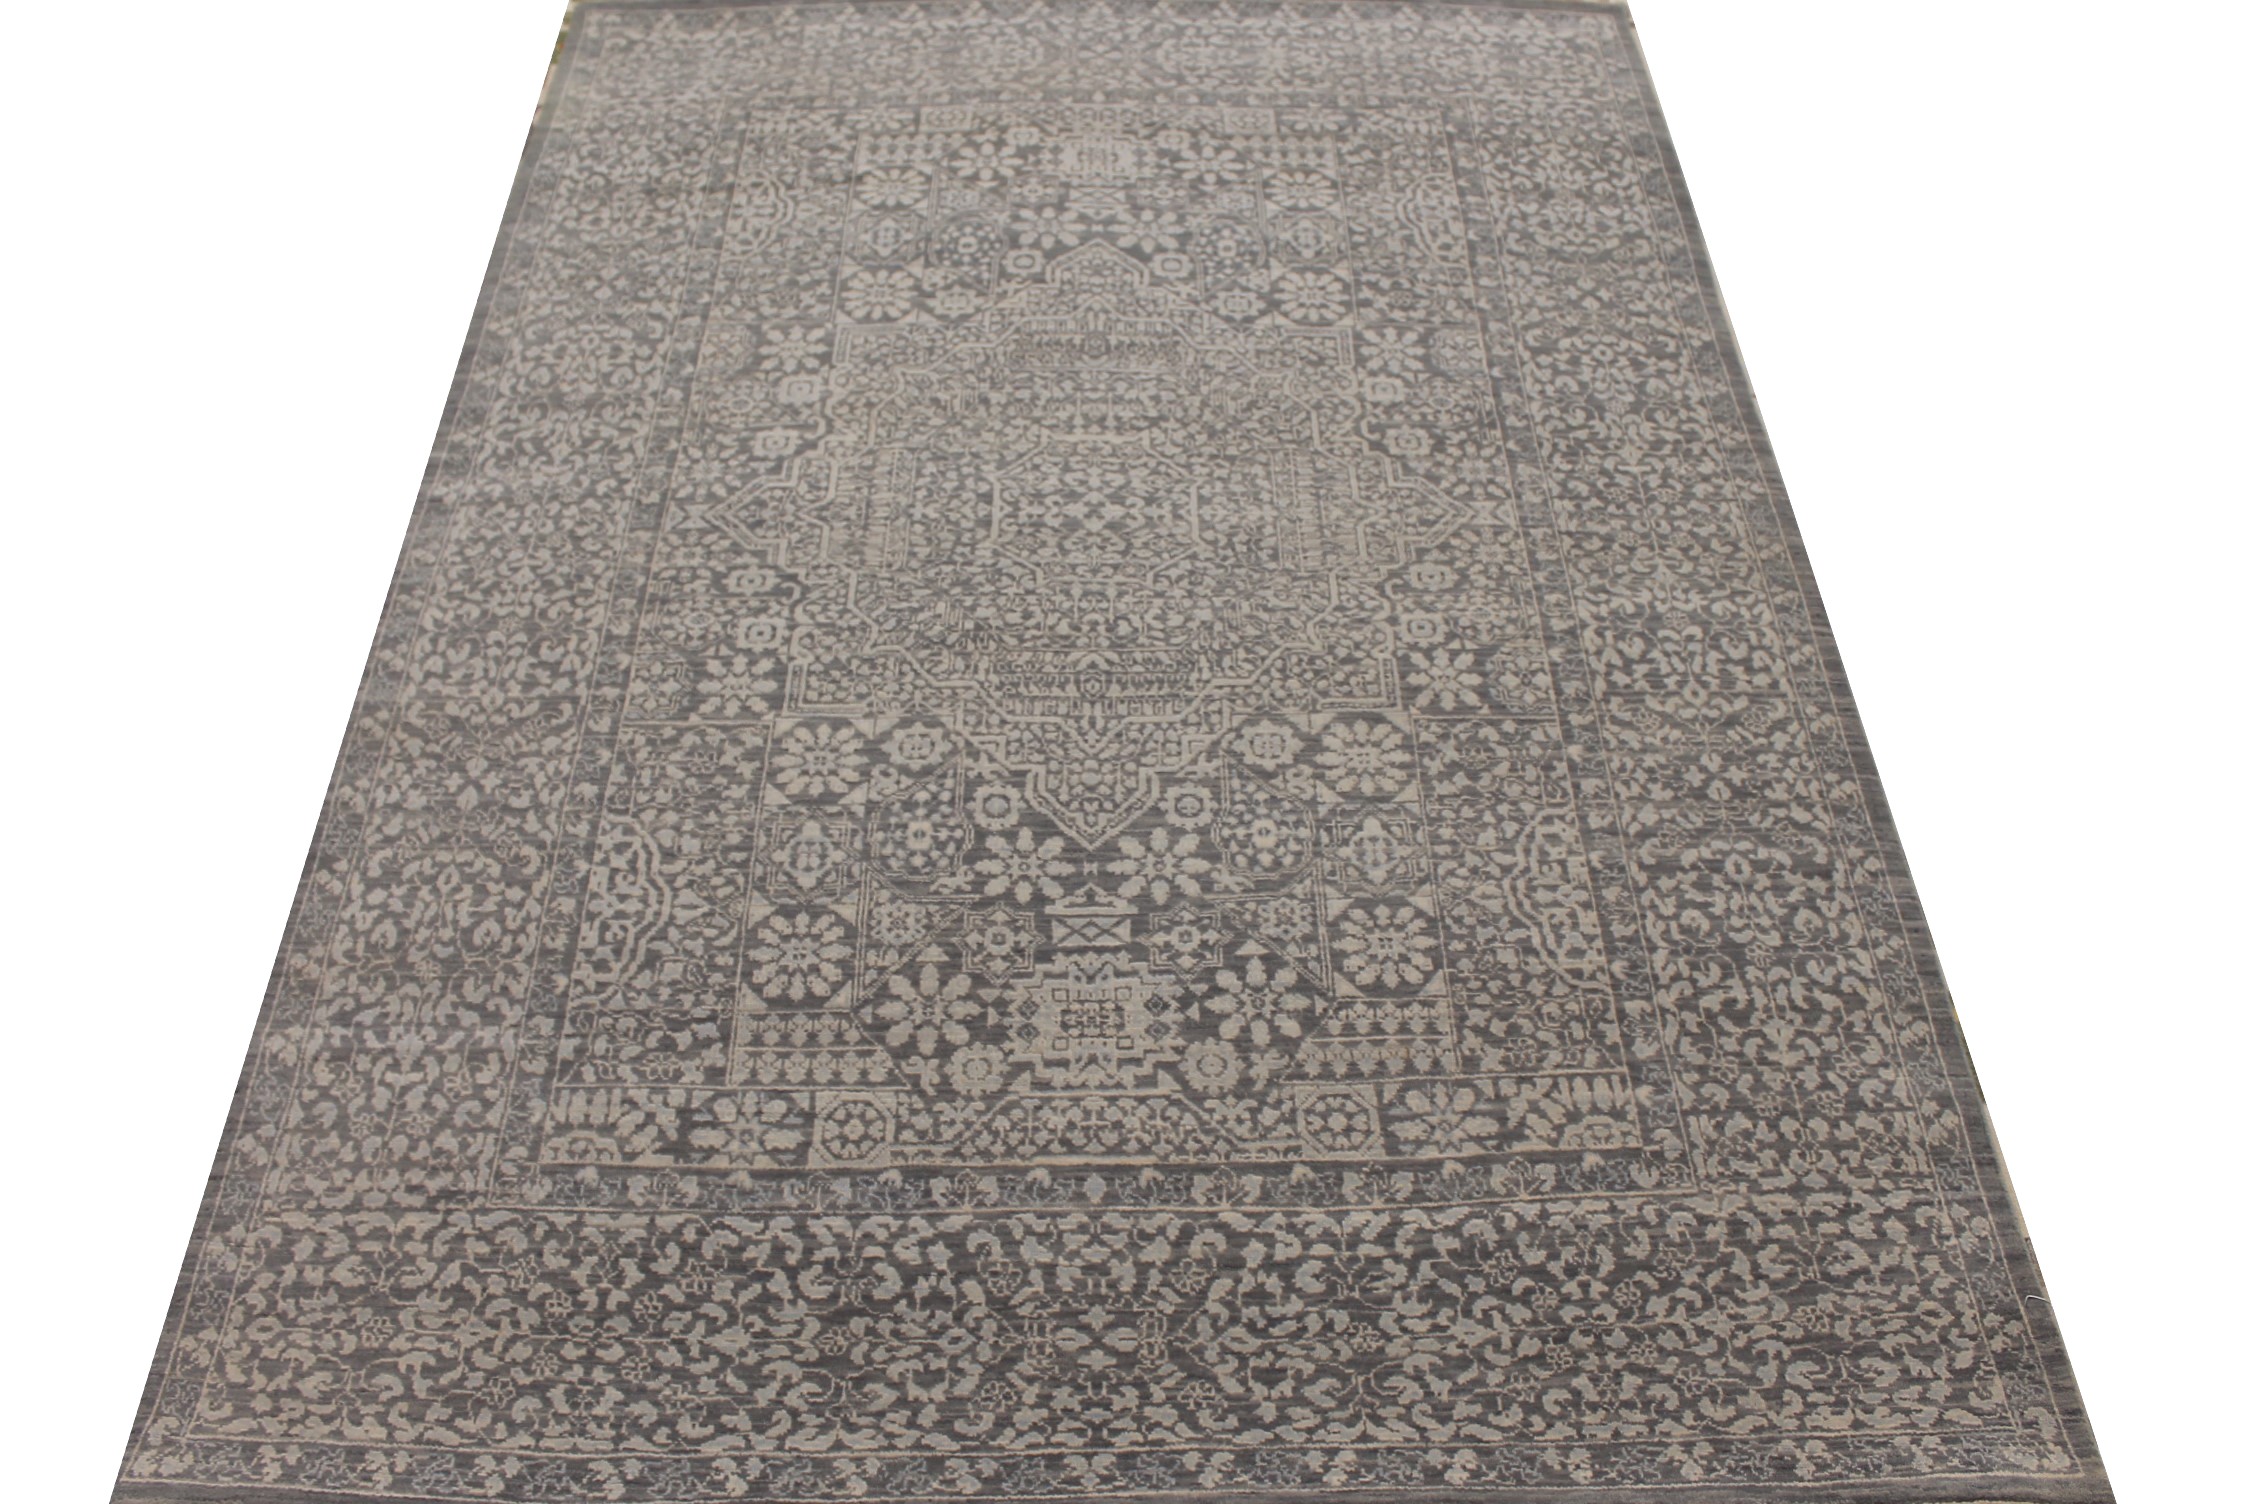 5x7/8 Aryana & Antique Revivals Hand Knotted Wool Area Rug - MR027457